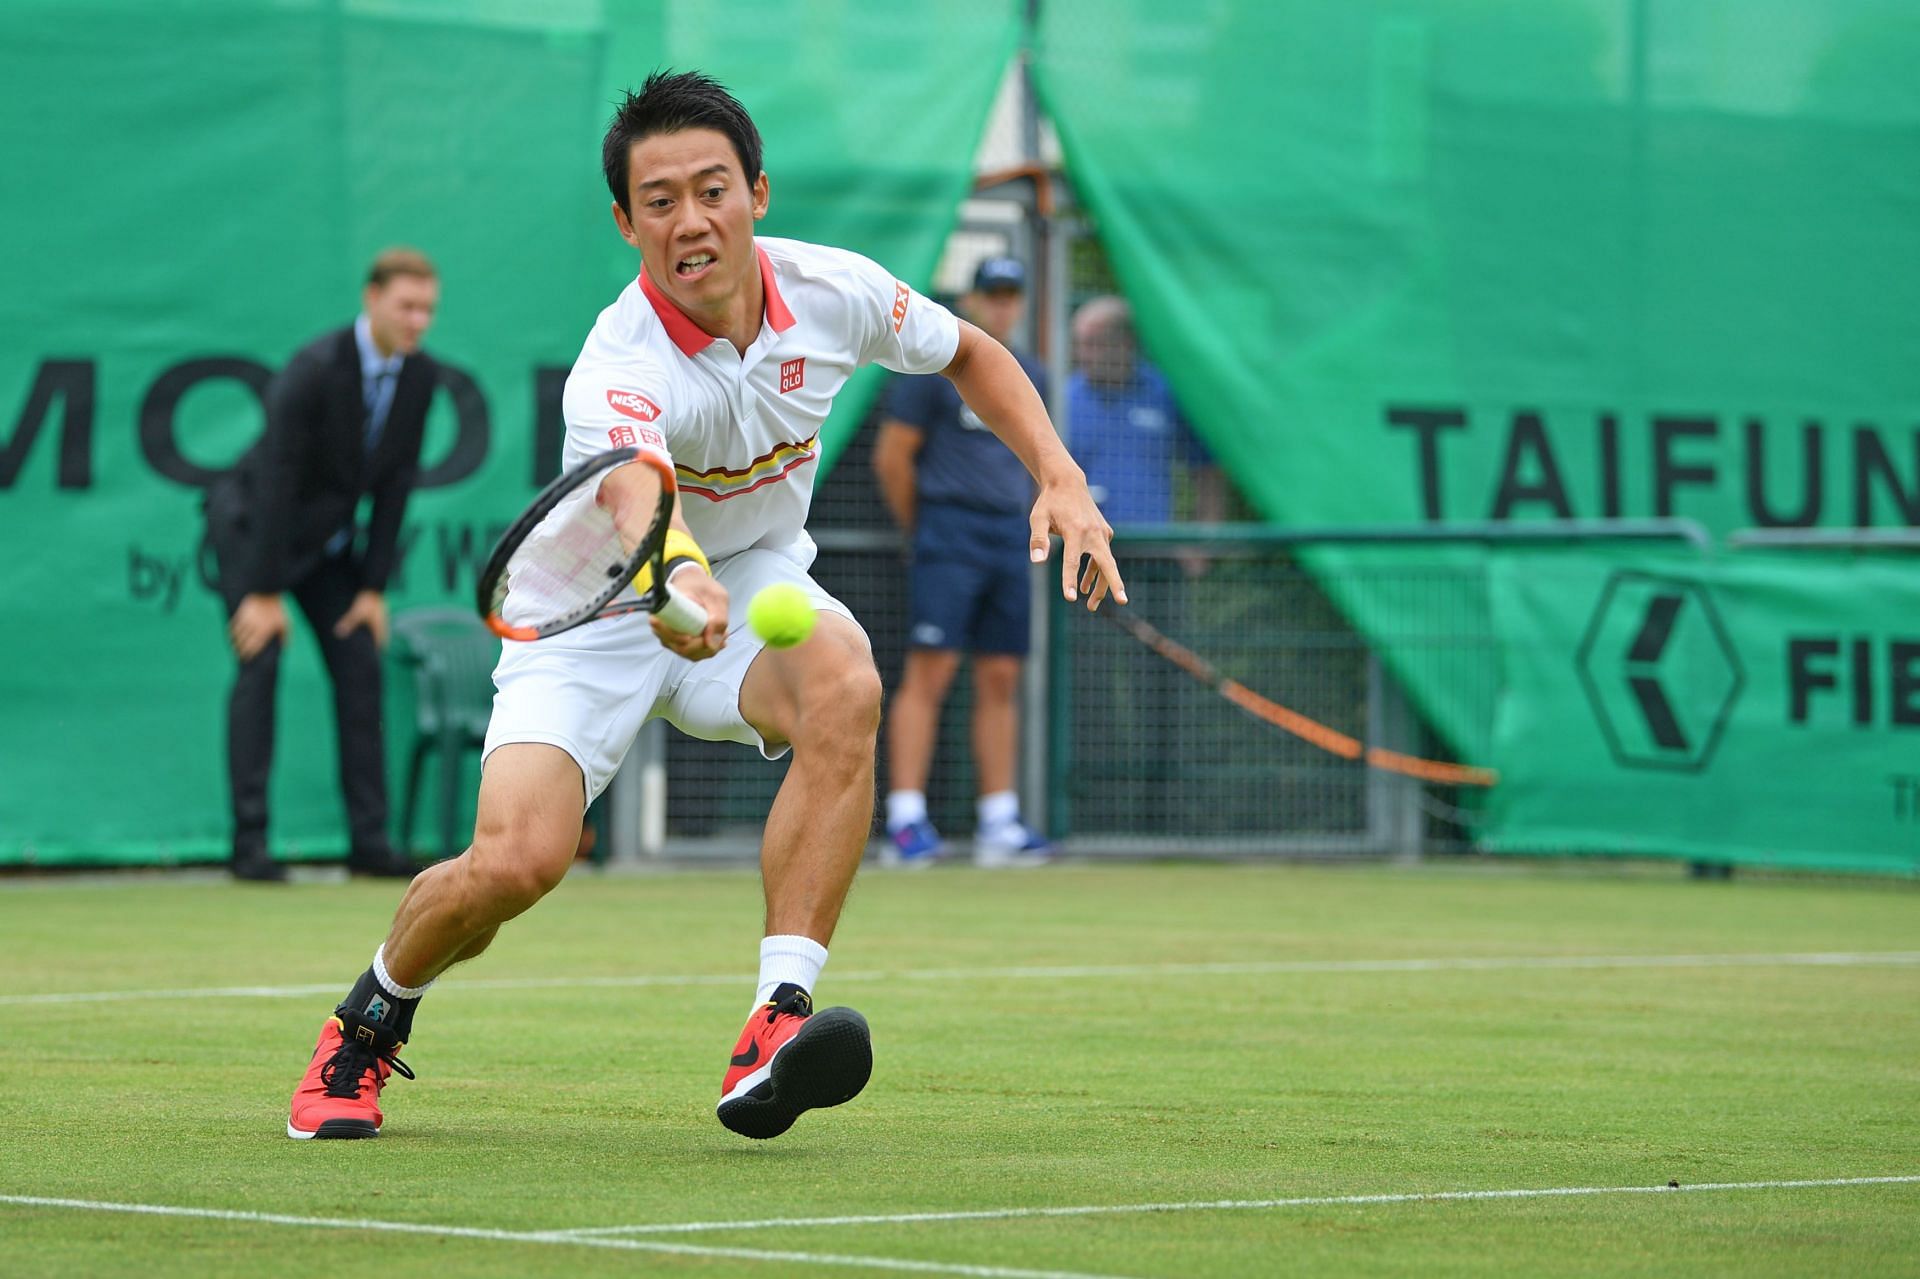 Nishikori has not played at a grasscourt event in years.